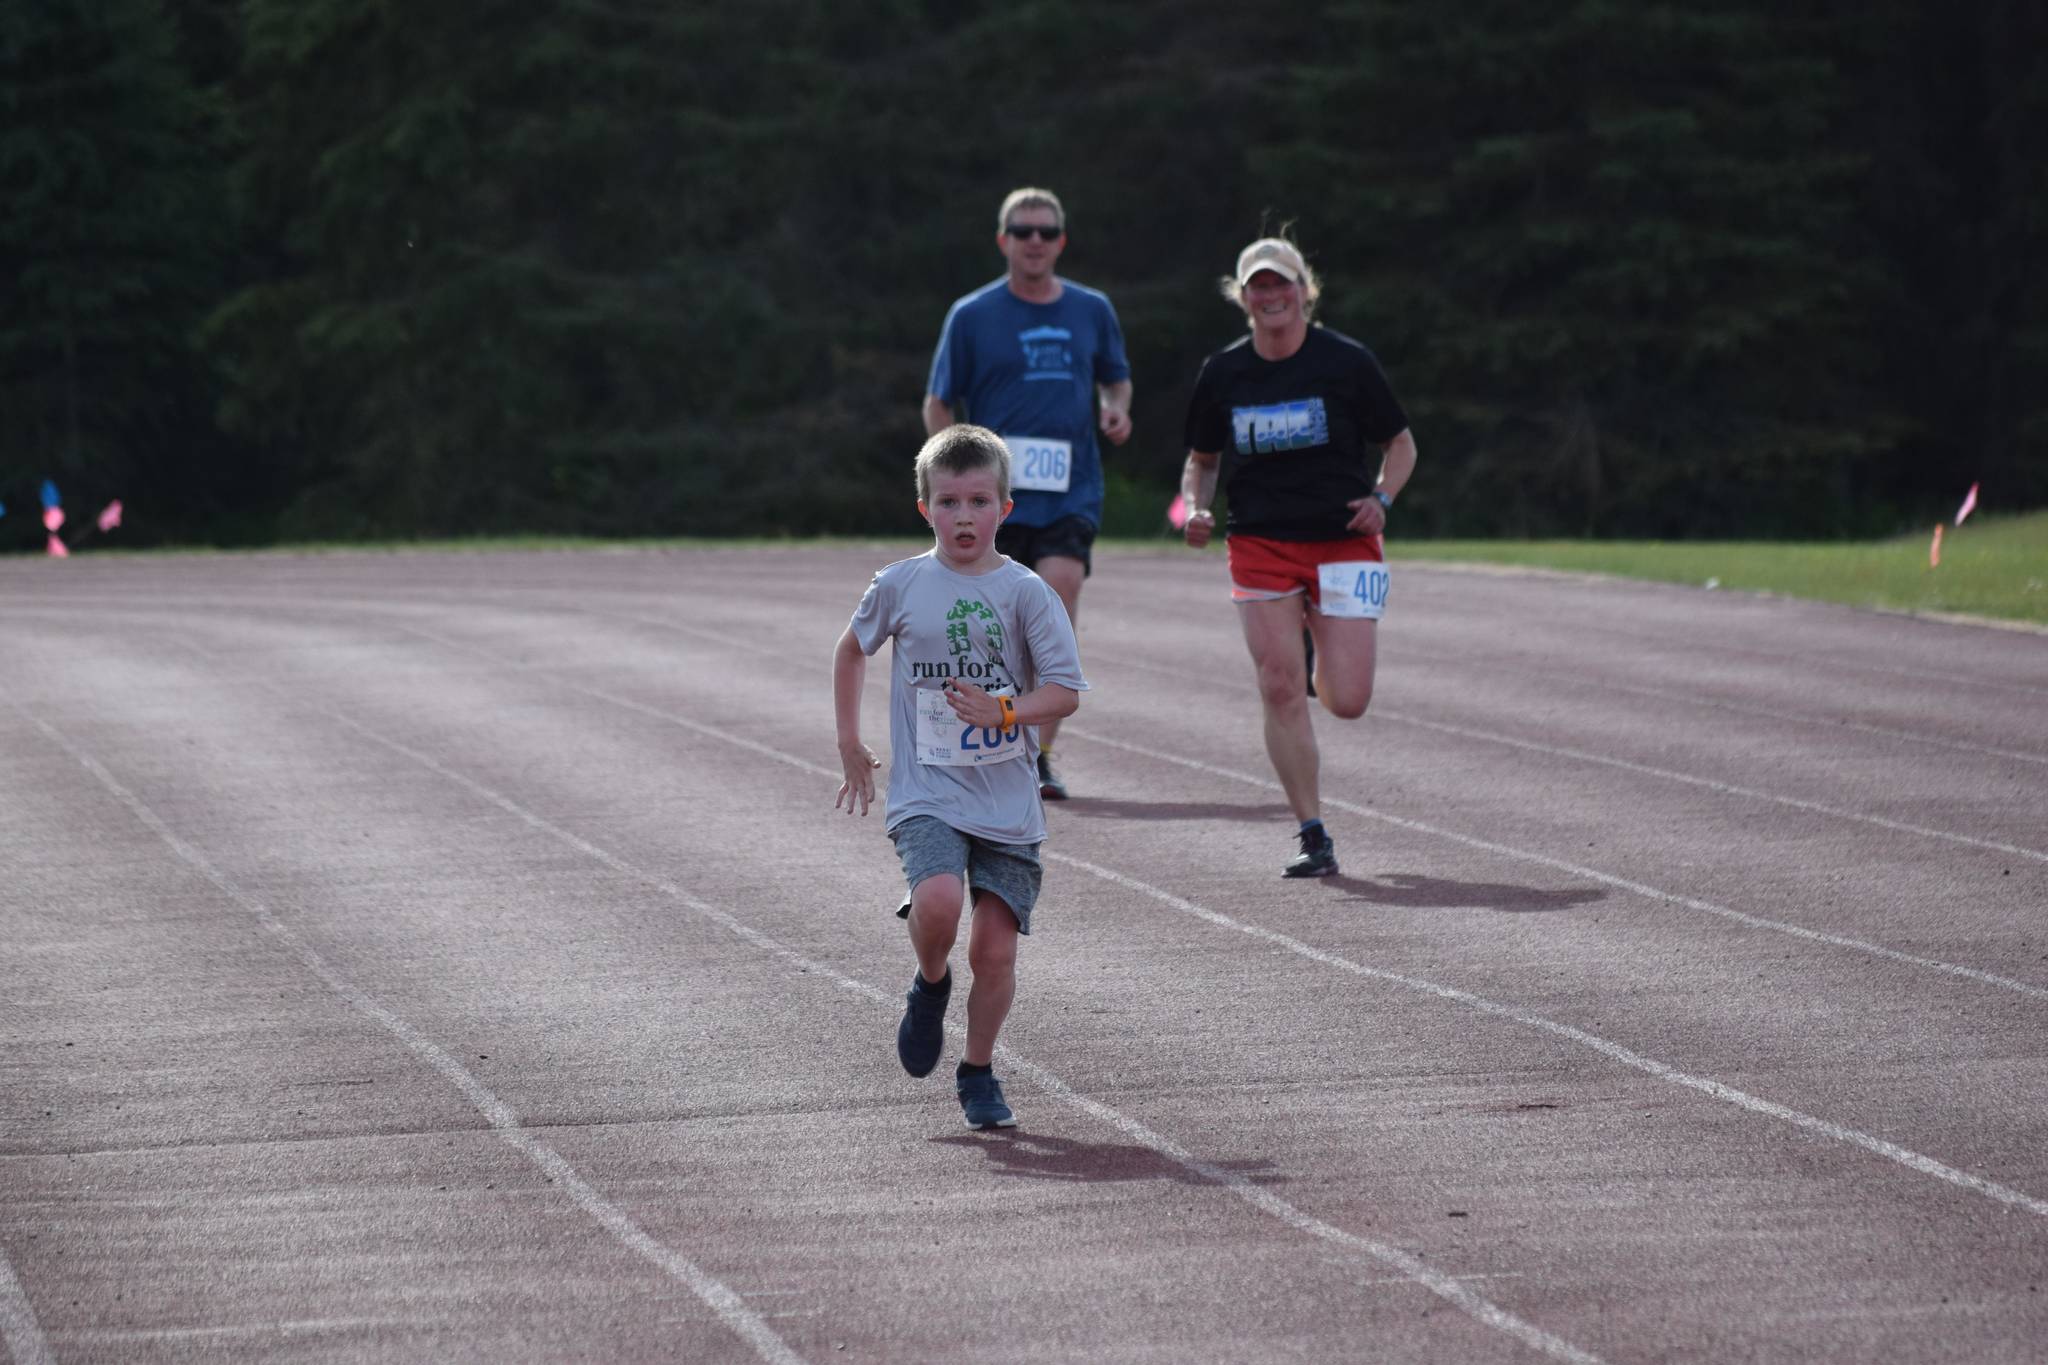 Gus Reimer crosses the finish line in front of Adam Reimer and Julie Laker during the first race of the Salmon Run Series at Skyview Middle School on Wednesday, July 7, 2021. (Camille Botello / Peninsula Clarion)